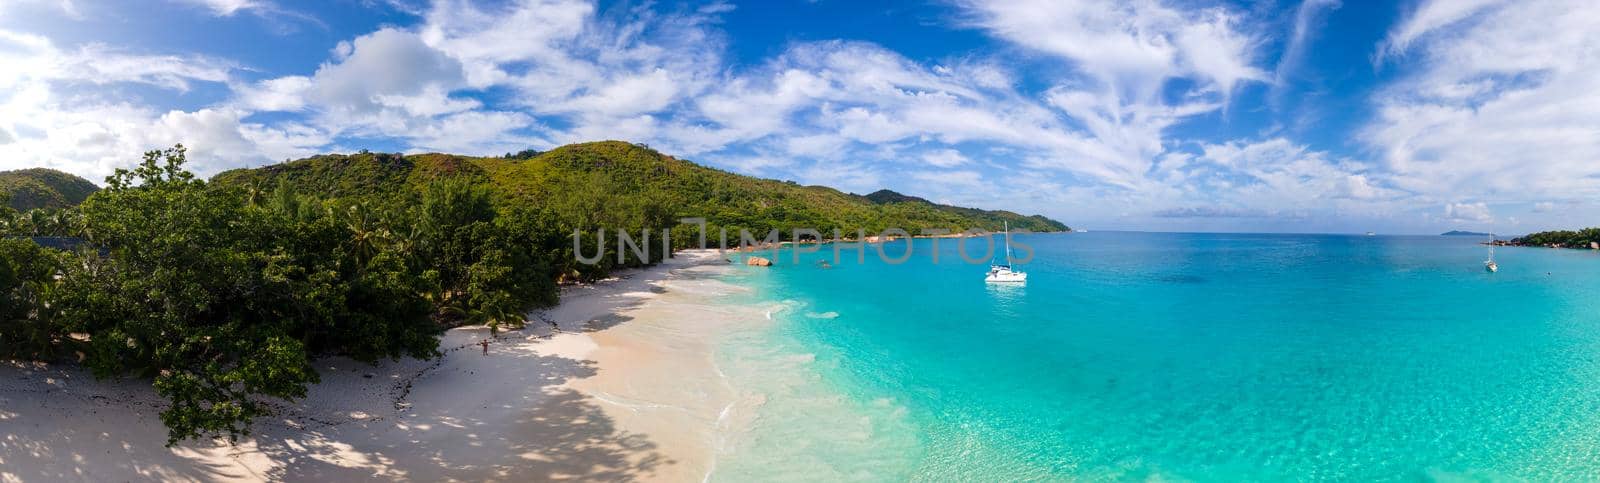 Praslin Seychelles tropical island with withe beaches and palm trees, Anse Lazio beach ,Palm tree stands over deserted tropical island dream beach in Anse Lazio, Seychelles by fokkebok